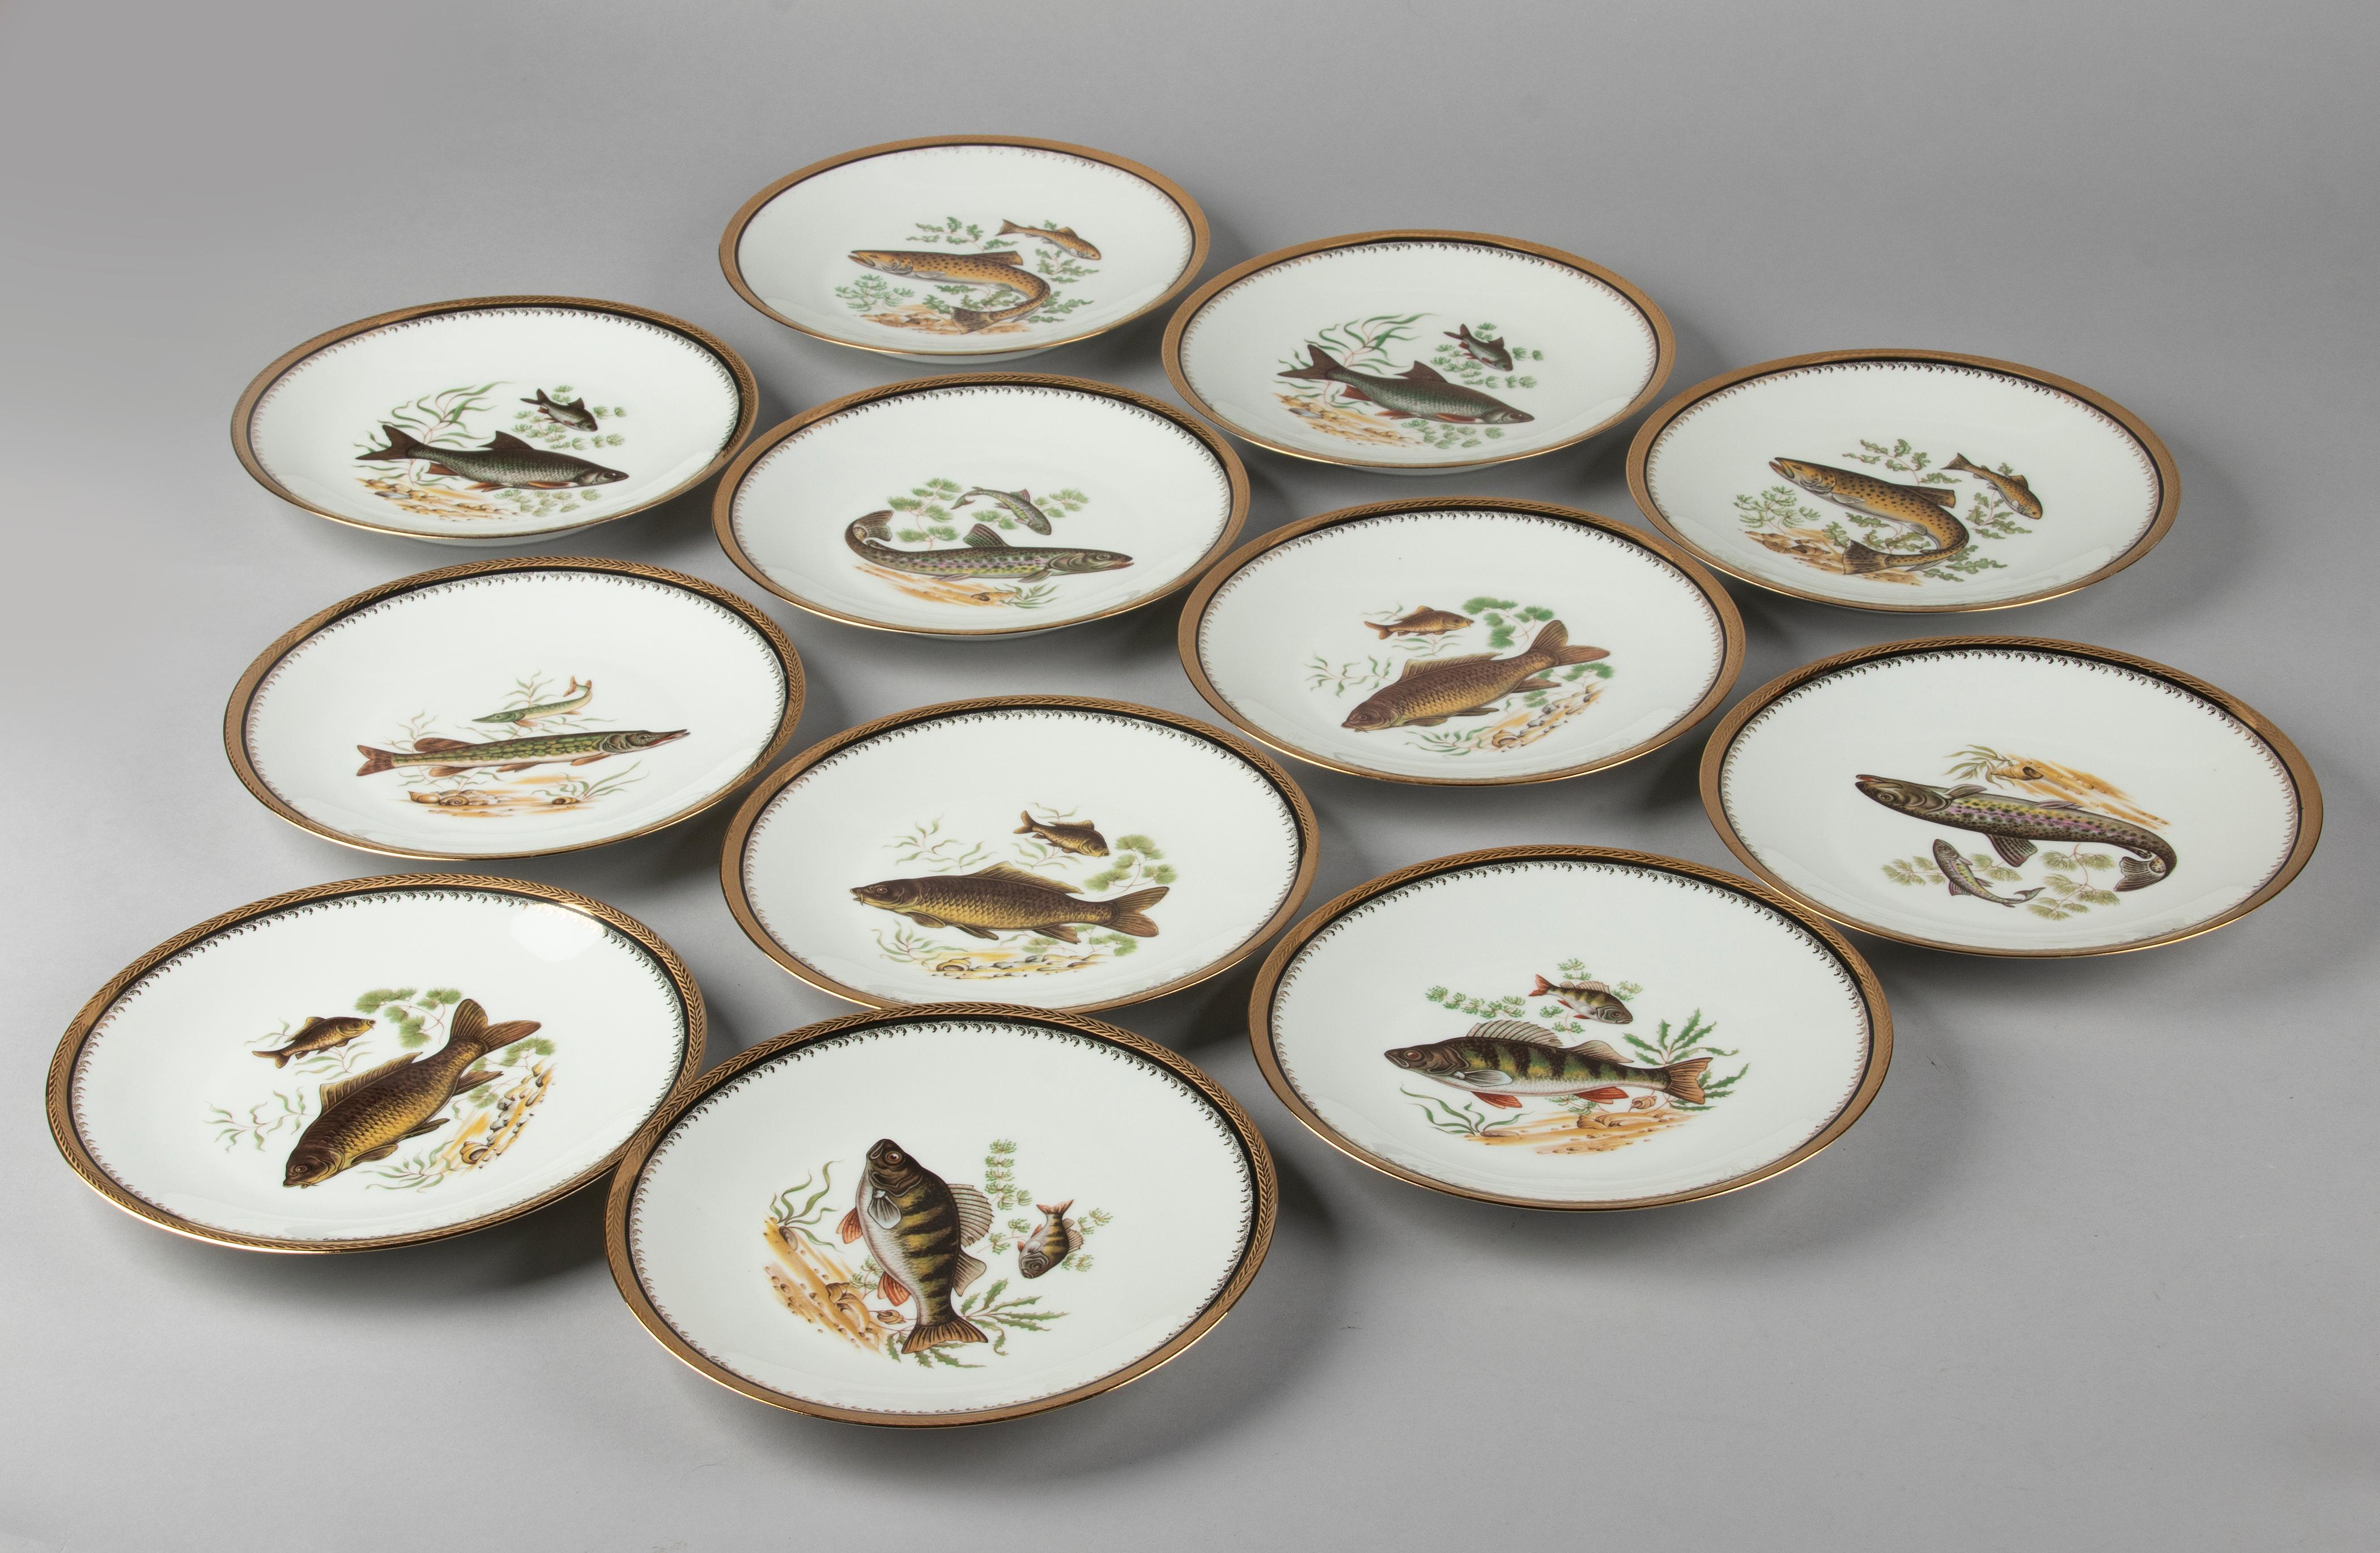 Beautiful porcelain fish service from the French brand Limoges. The service is decorated with all kinds of different images of fish, the edges are decorated with a narrow black edge and gold-coloured accents. The service dates from around 1960. The